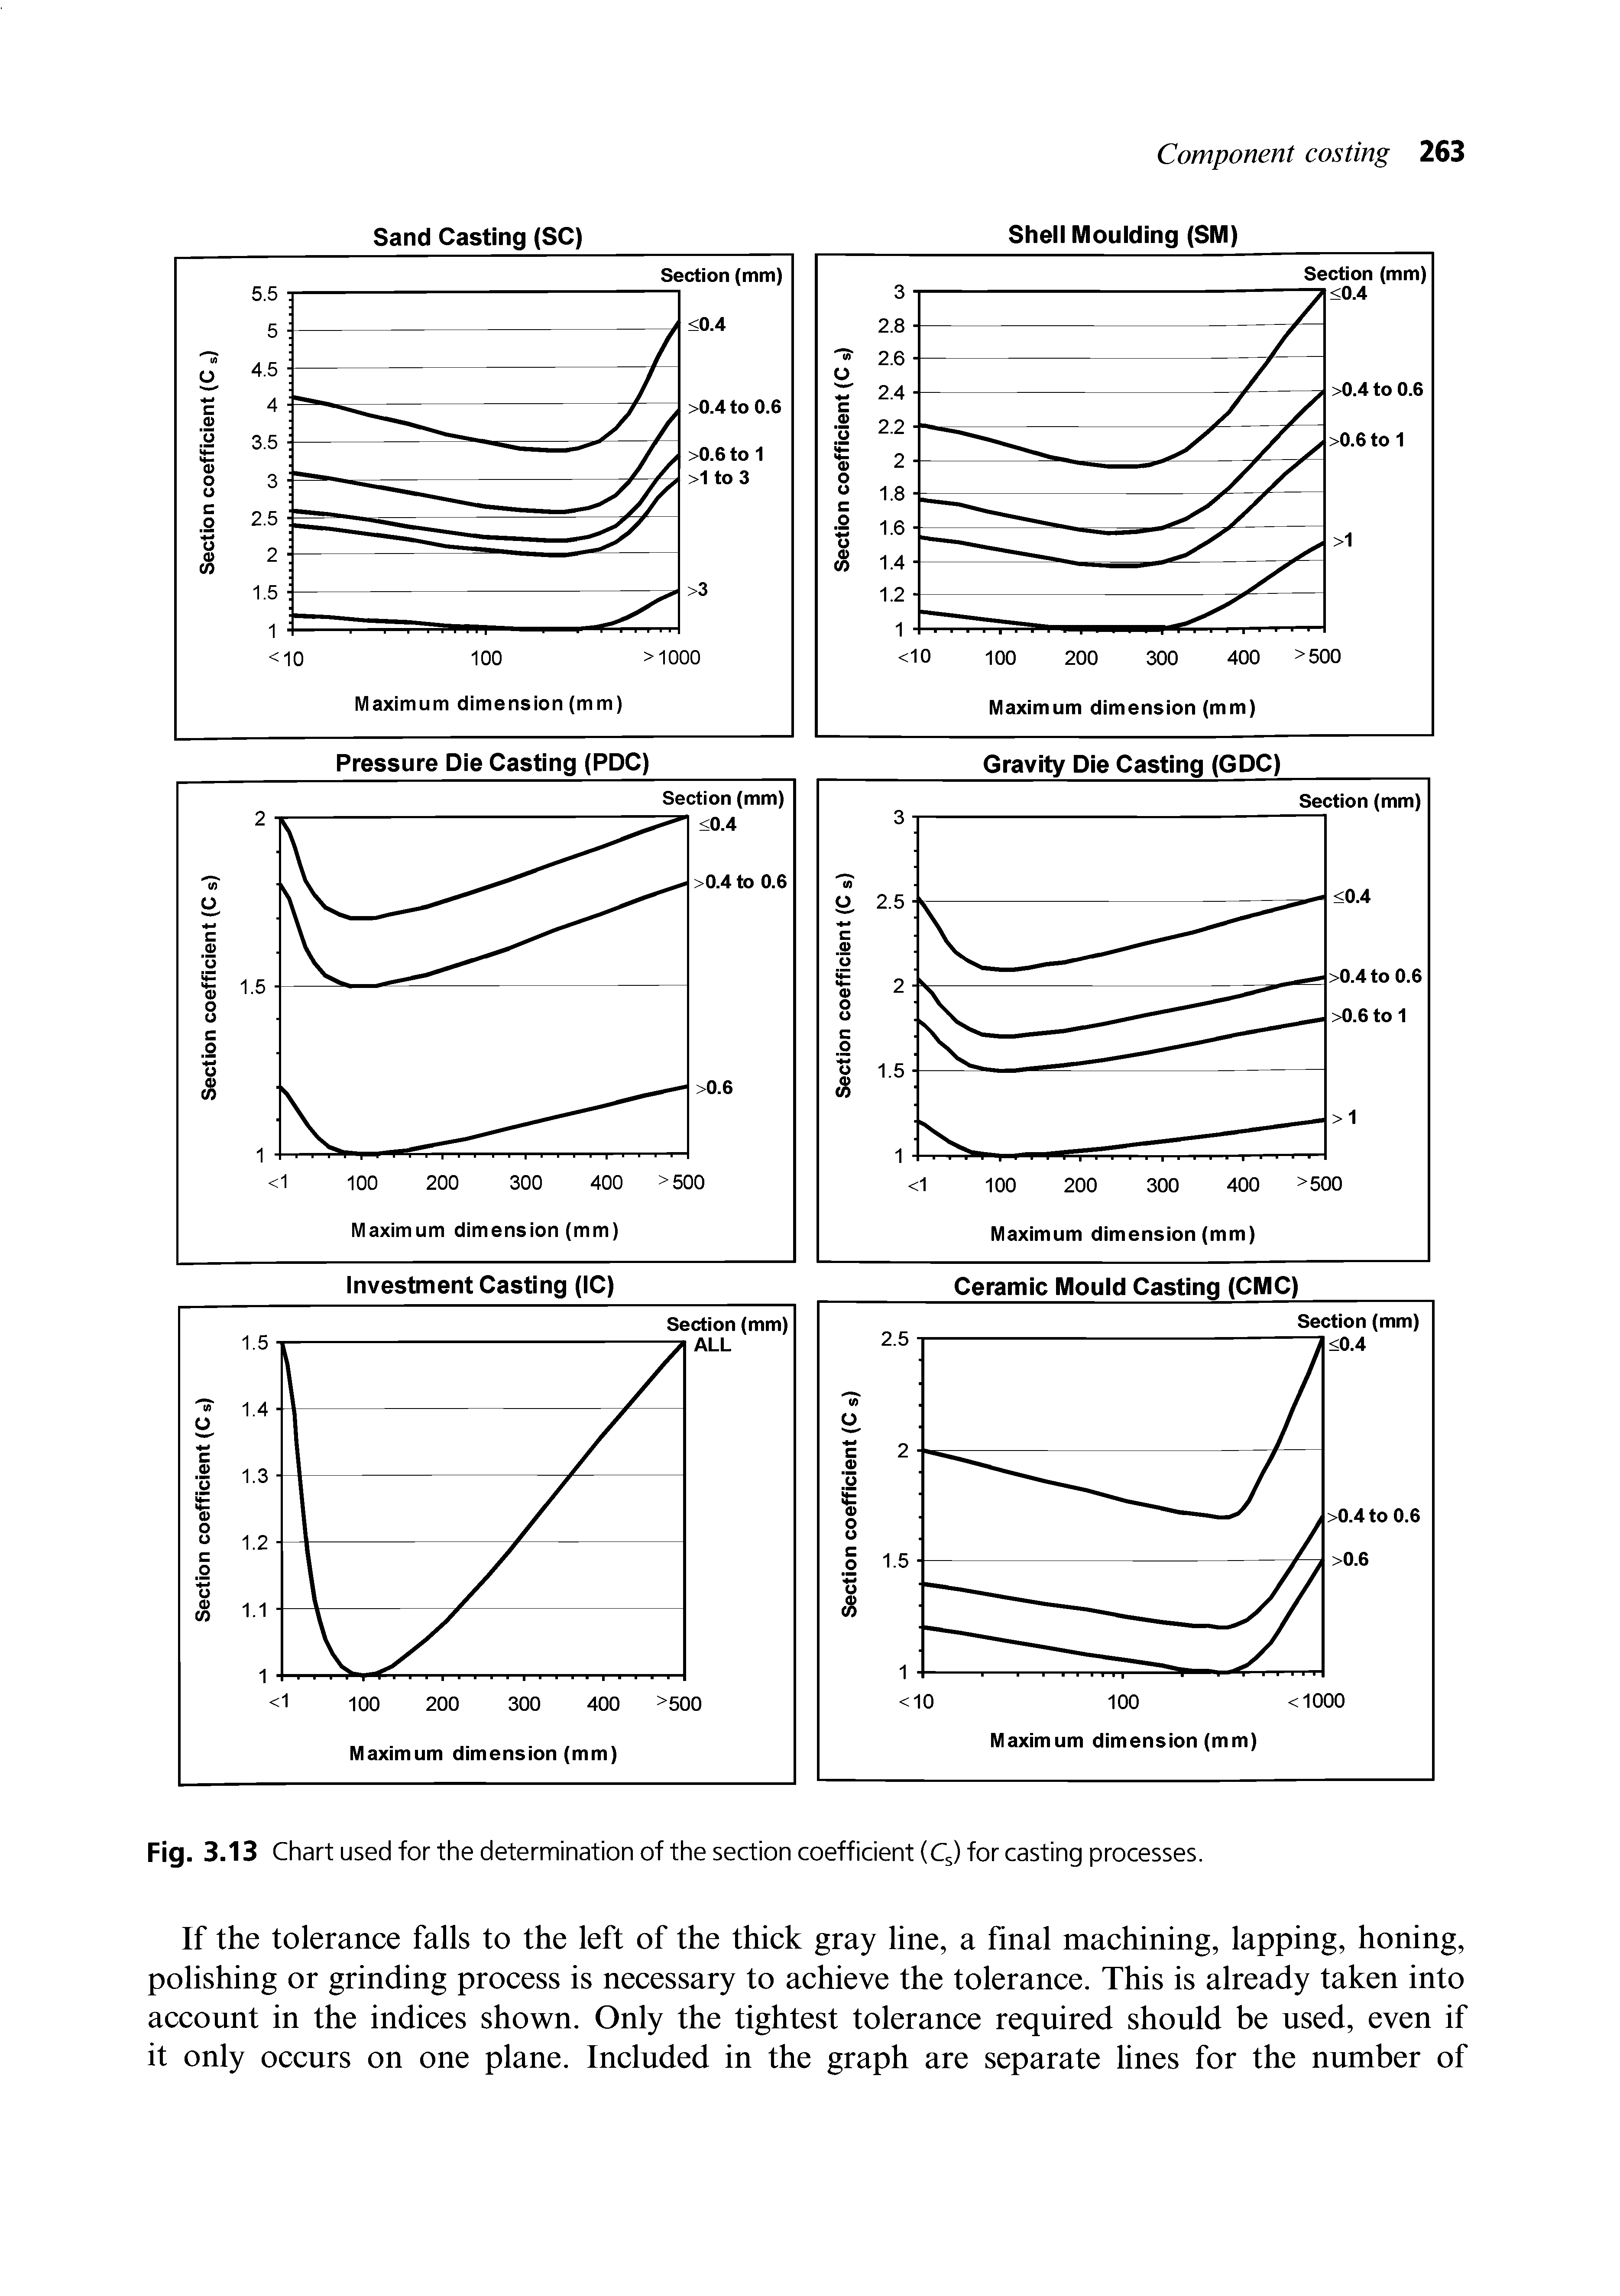 Fig. 3.13 Chart used for the determination of the section coefficient (Cg) for casting processes.